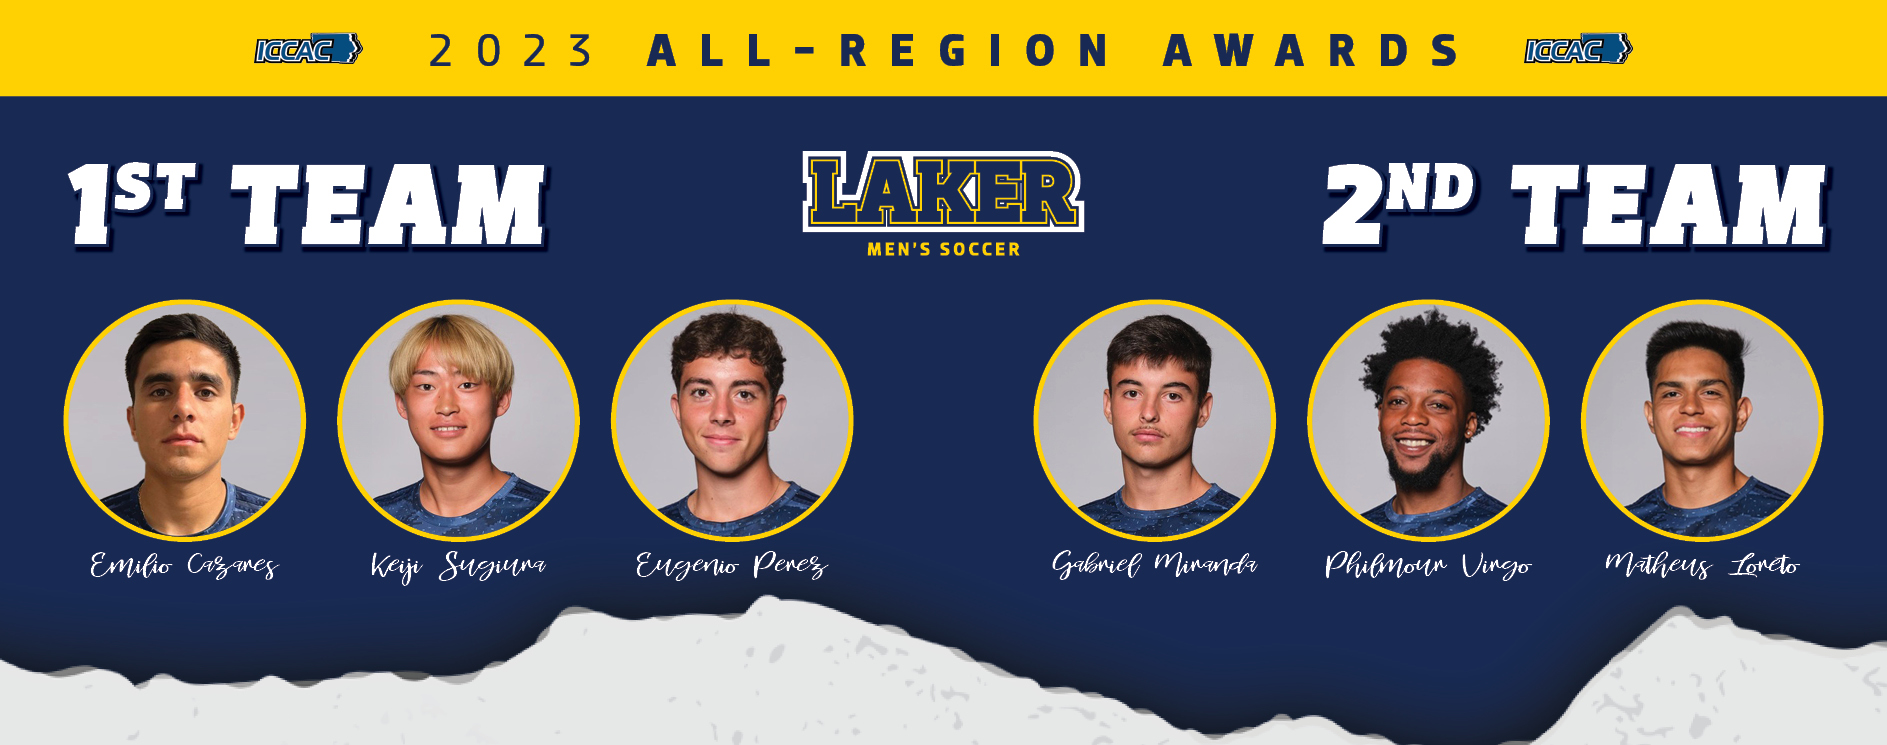 Six Iowa Lakes Players Named to All-Region Team